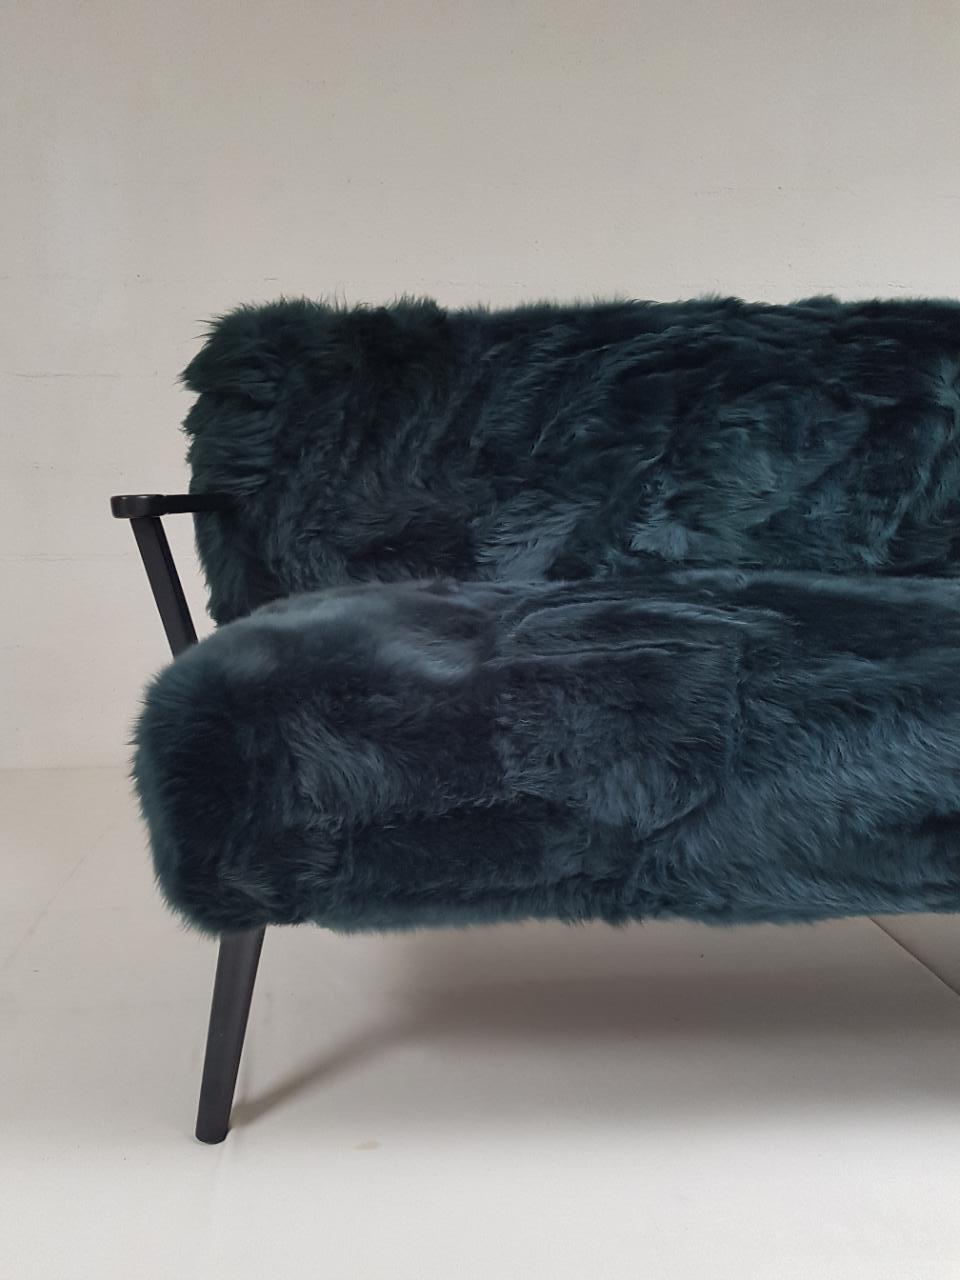 Very comfortable sofa with dyed dark green sheepskin upholstery.
Solid oak legs and arms.